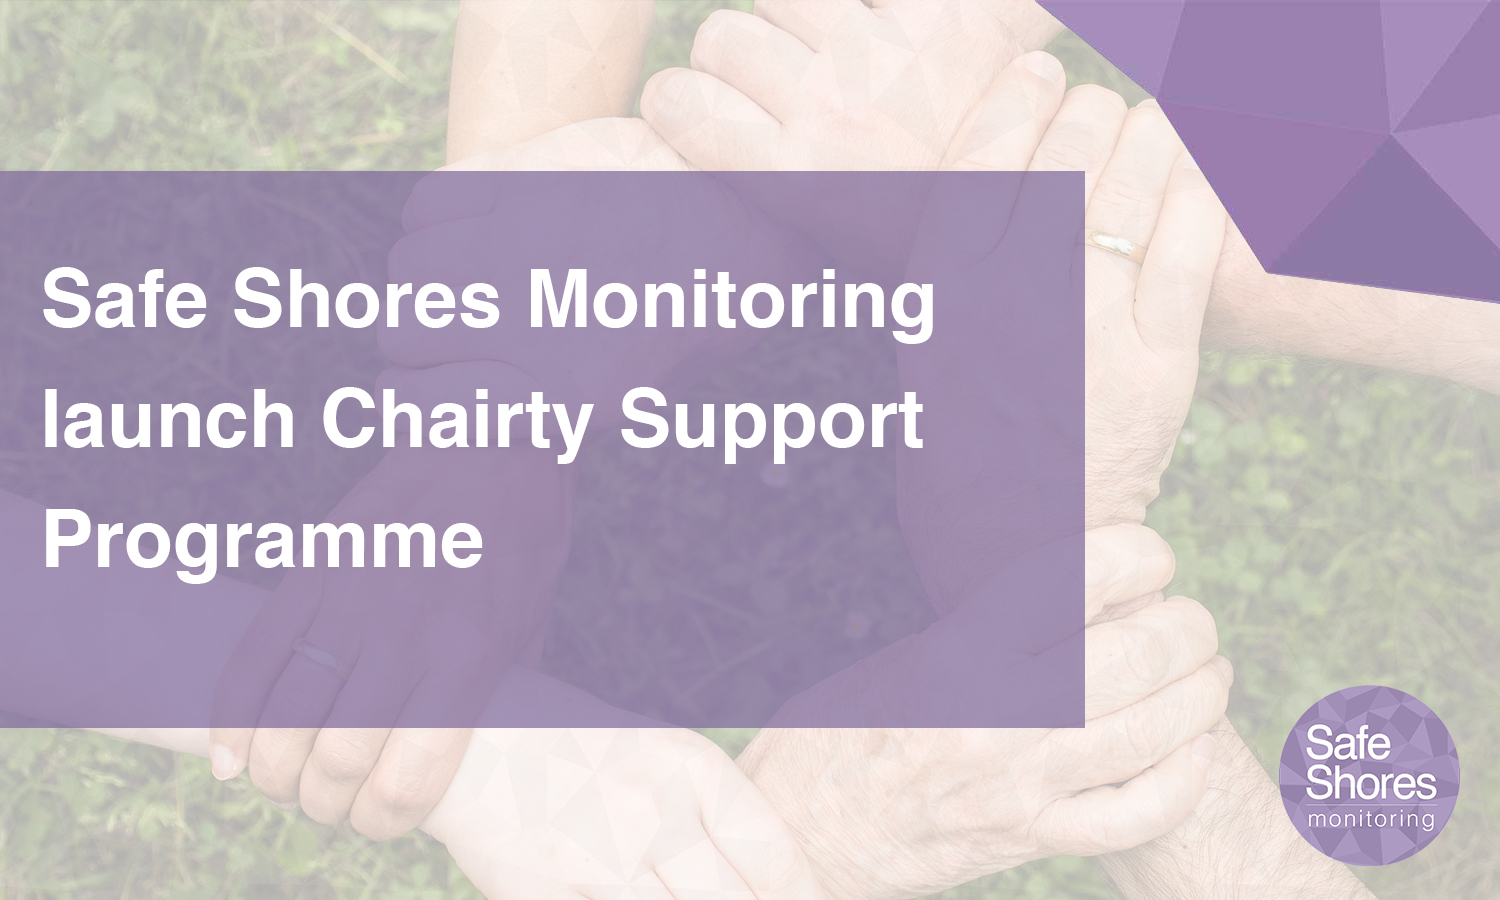 Launch of Charity Support Programme